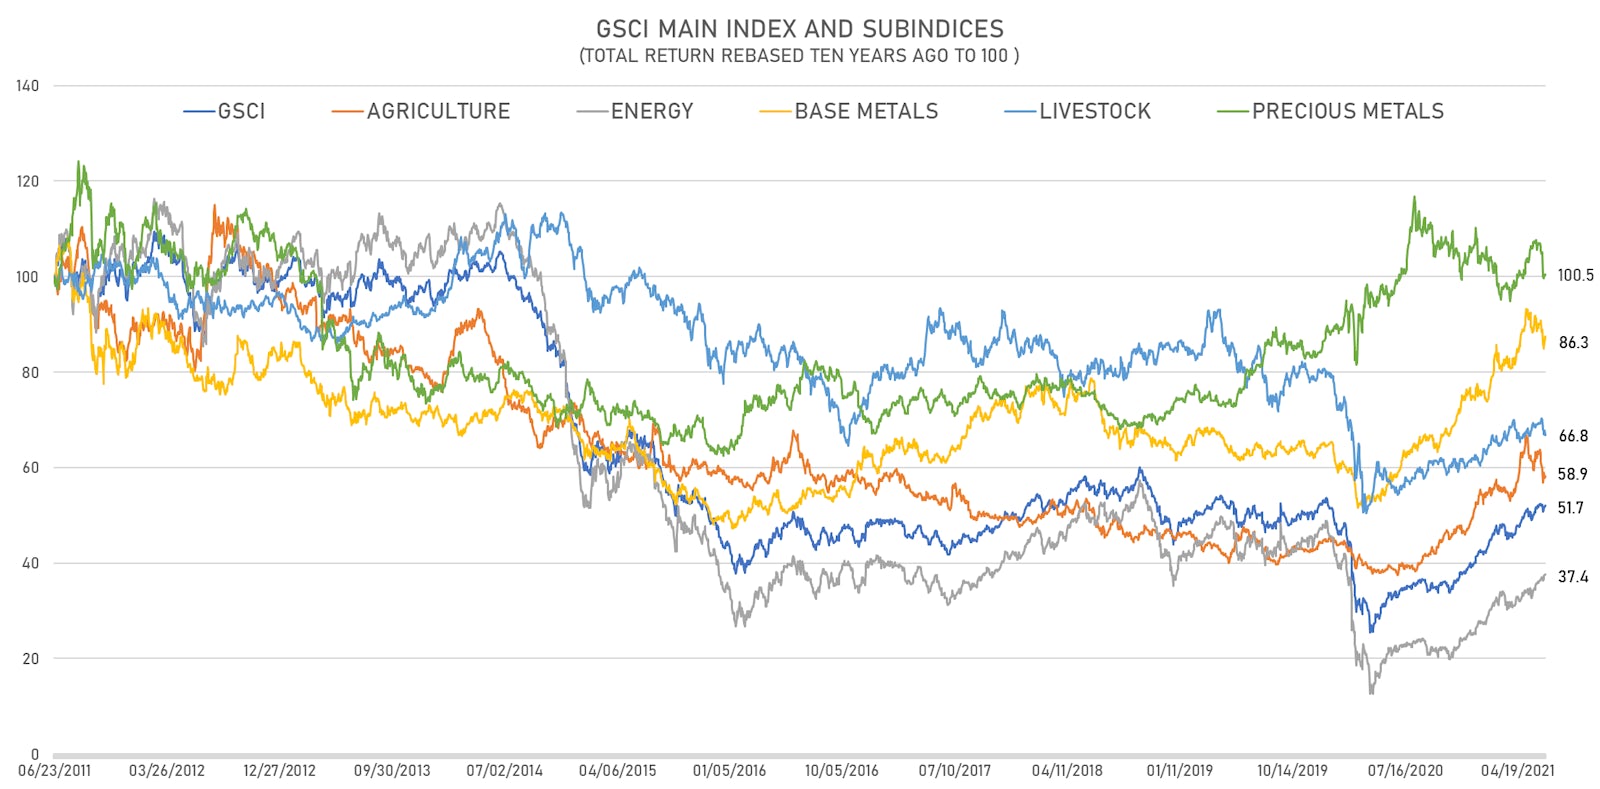 S&P GSCI sub-indices 10-year total returns | Sources: ϕpost, FactSet data